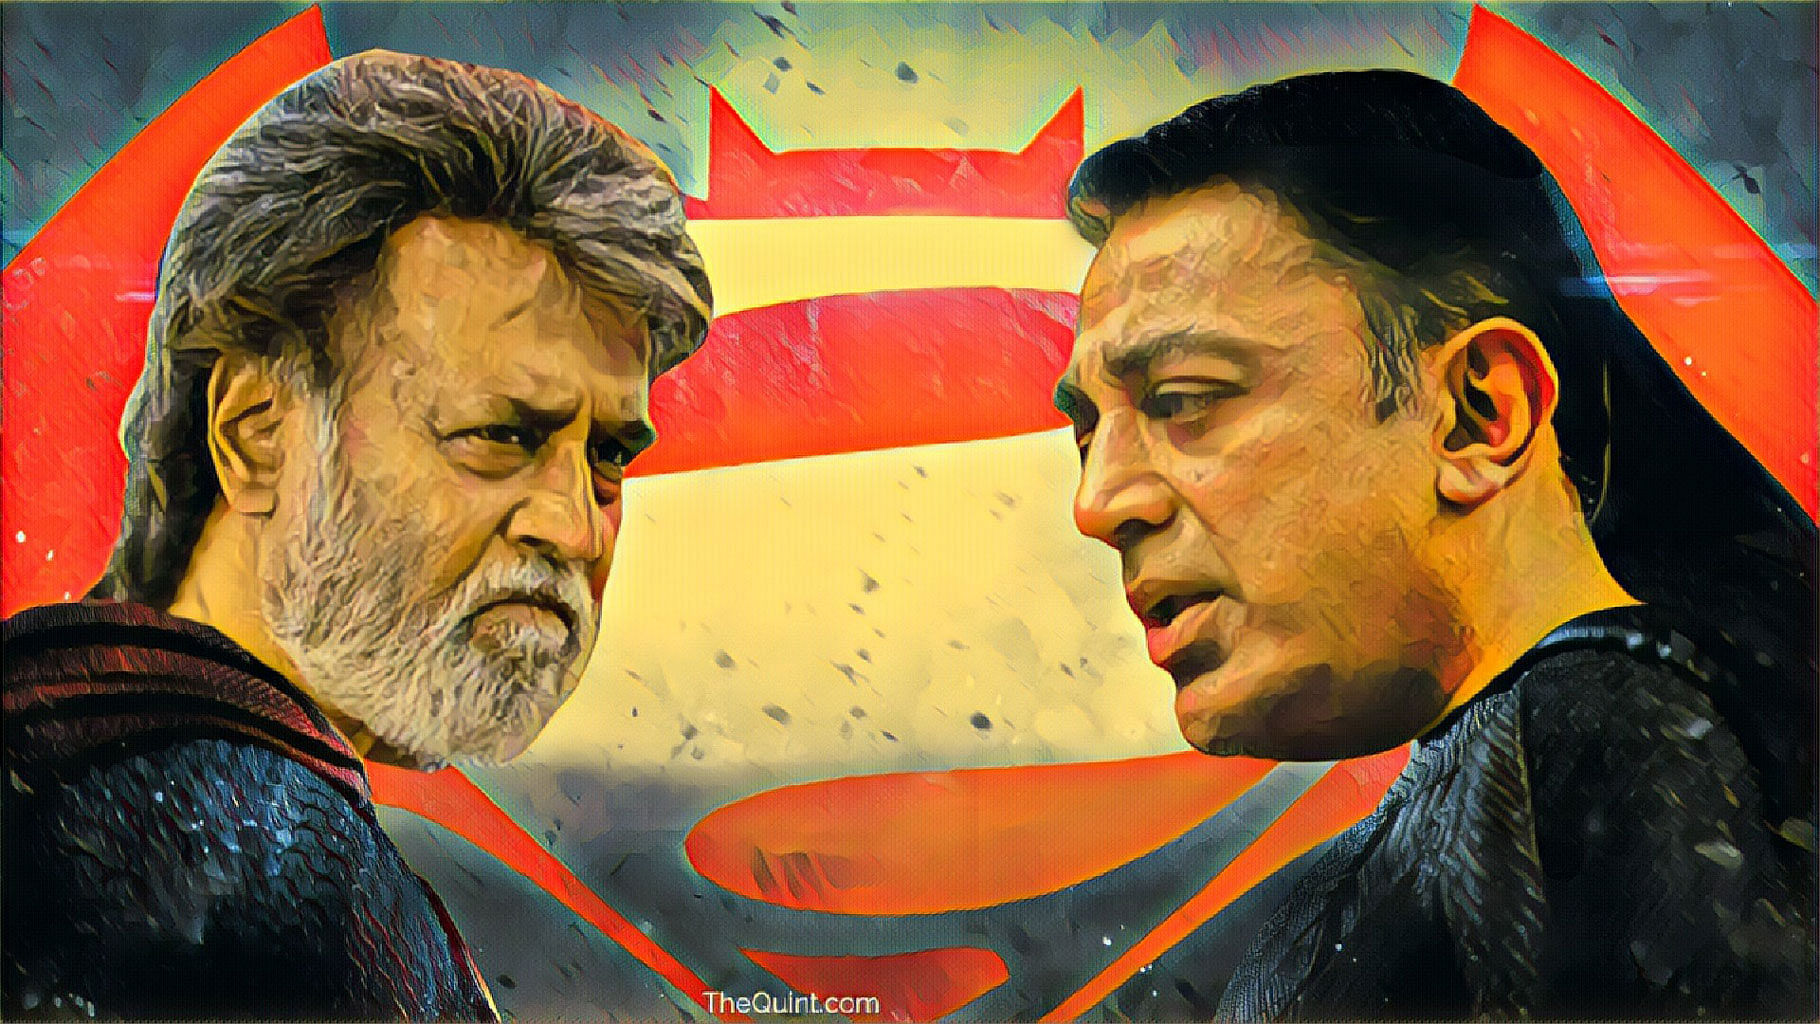 Now that’s what I call a ‘Hero’ image! With Kamal having confirmed his entry, will they fight or join hands?